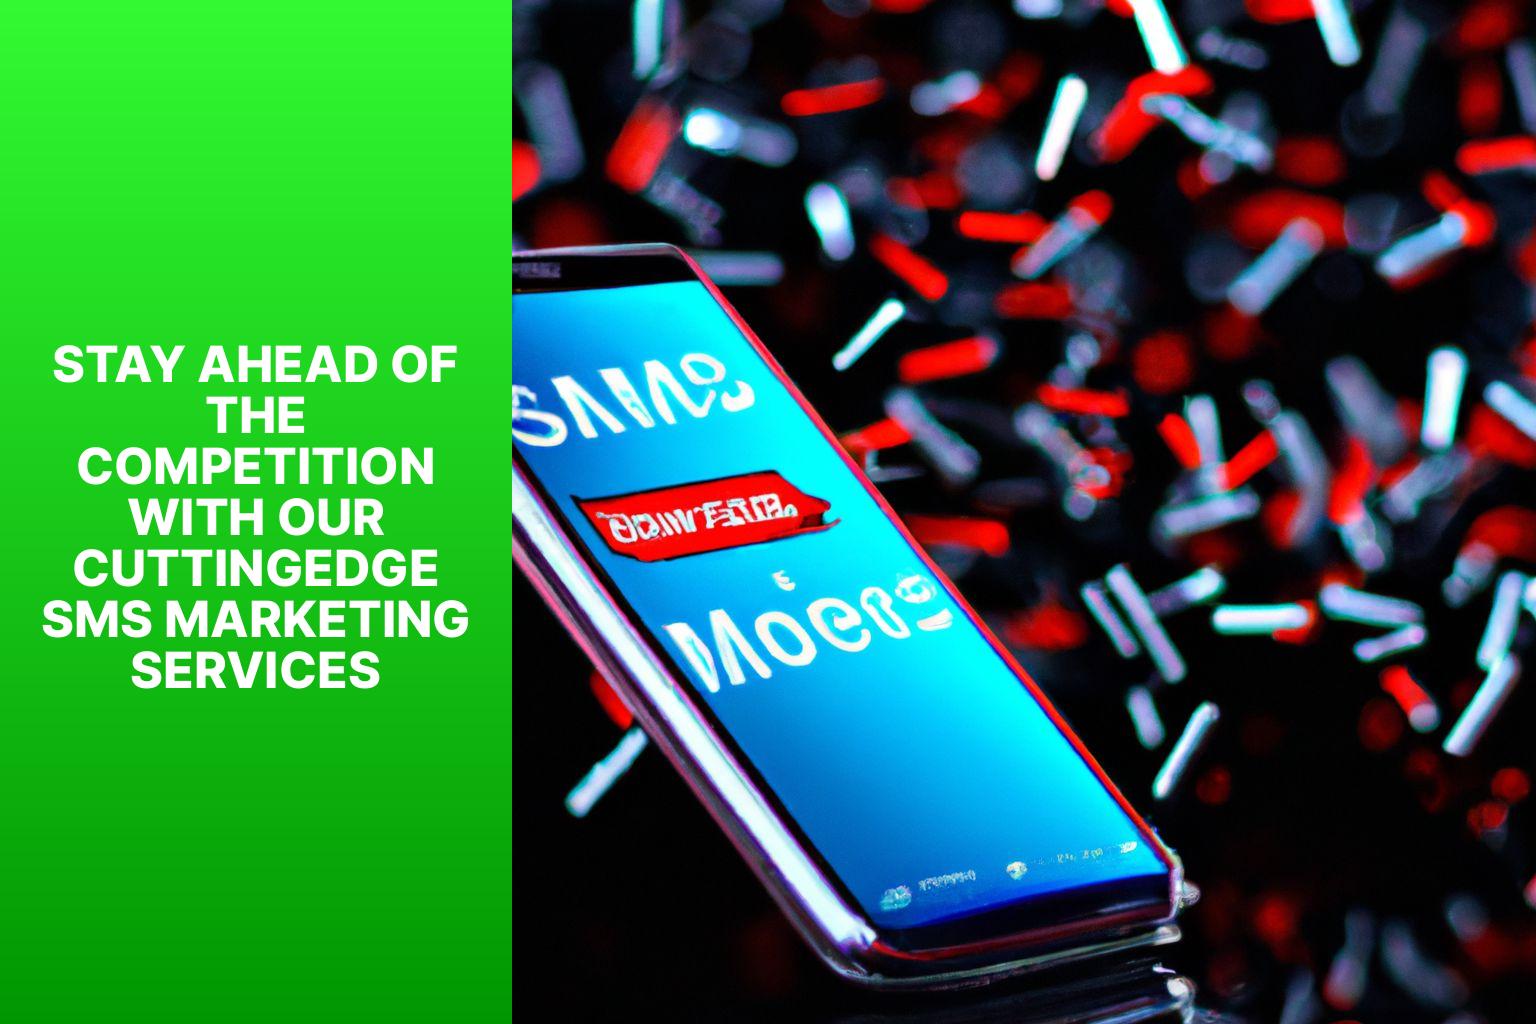 Stay Ahead of the Competition with Our CuttingEdge SMS Marketing Services